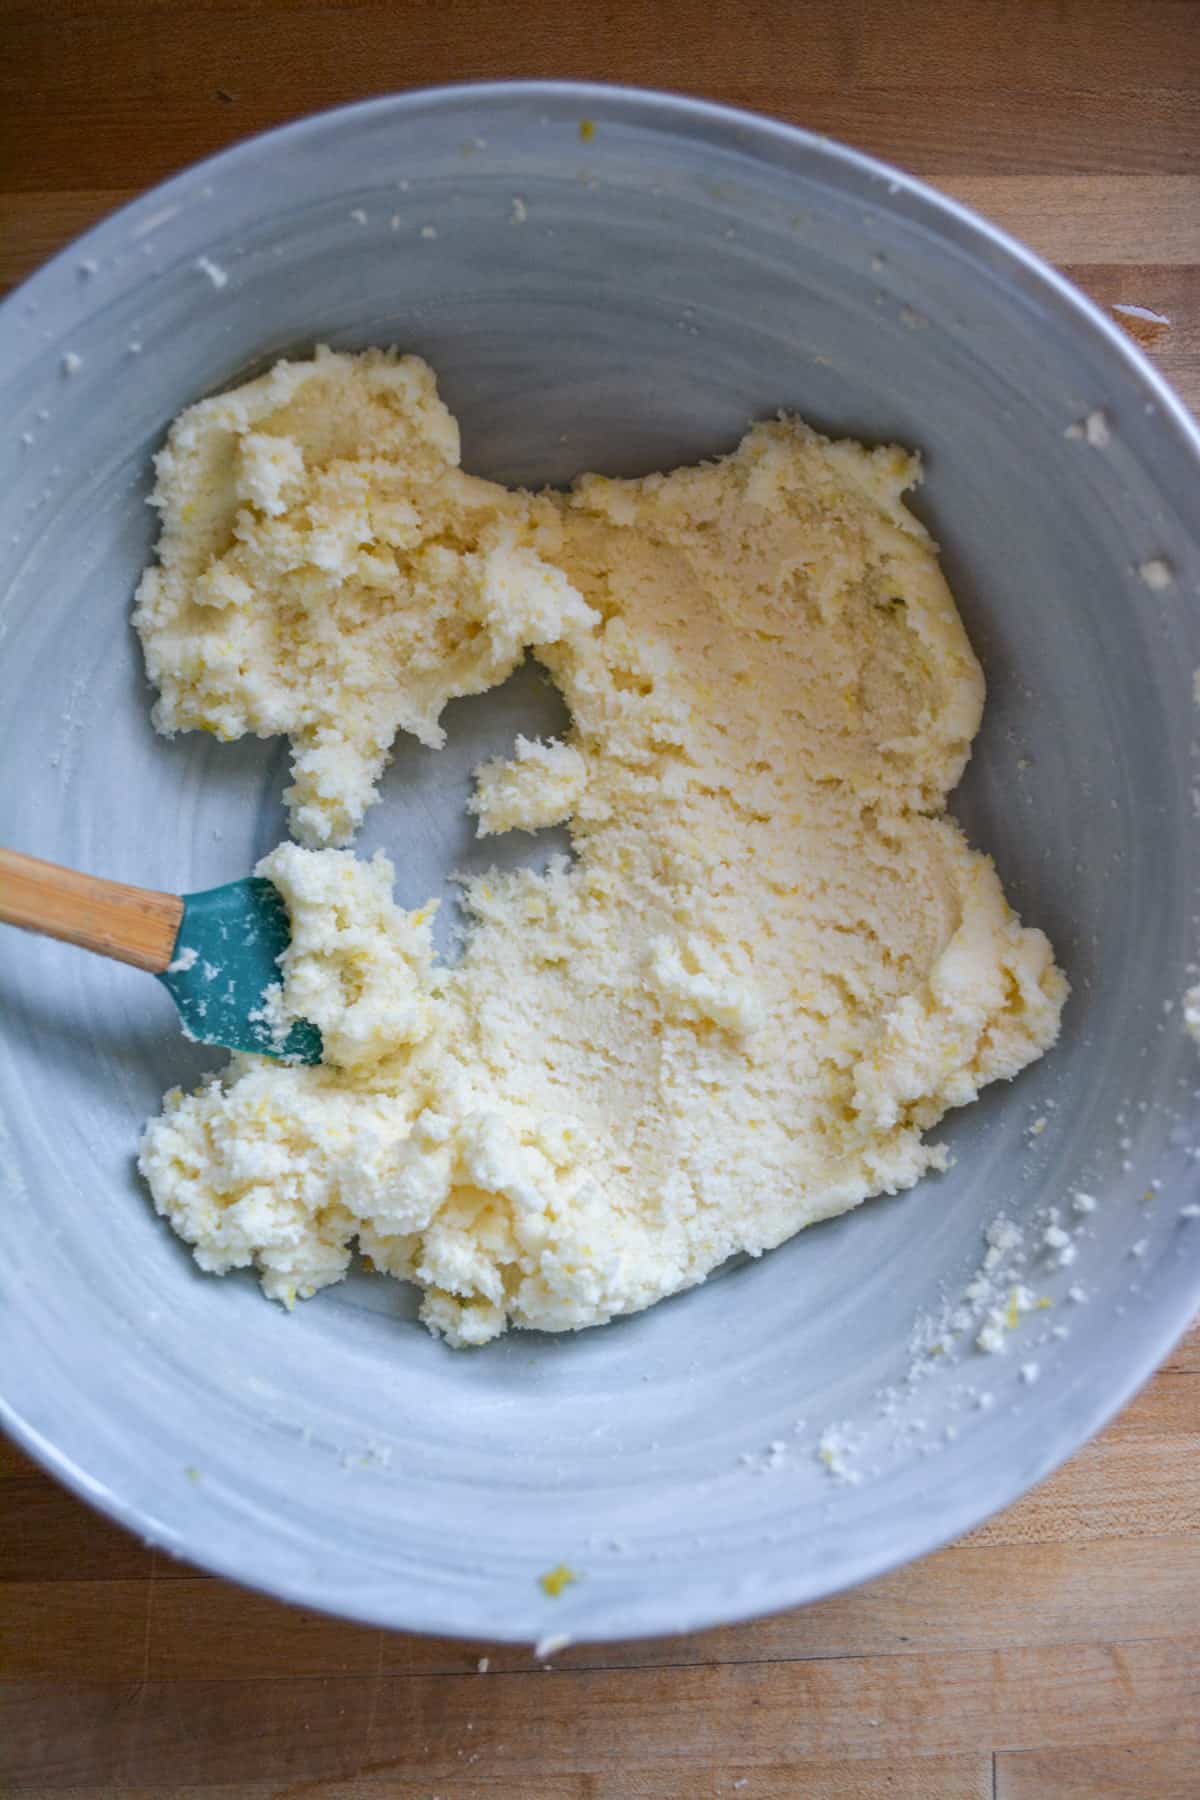 Vegan butter, sugar and lemon zest creamed together in a mixing bowl.